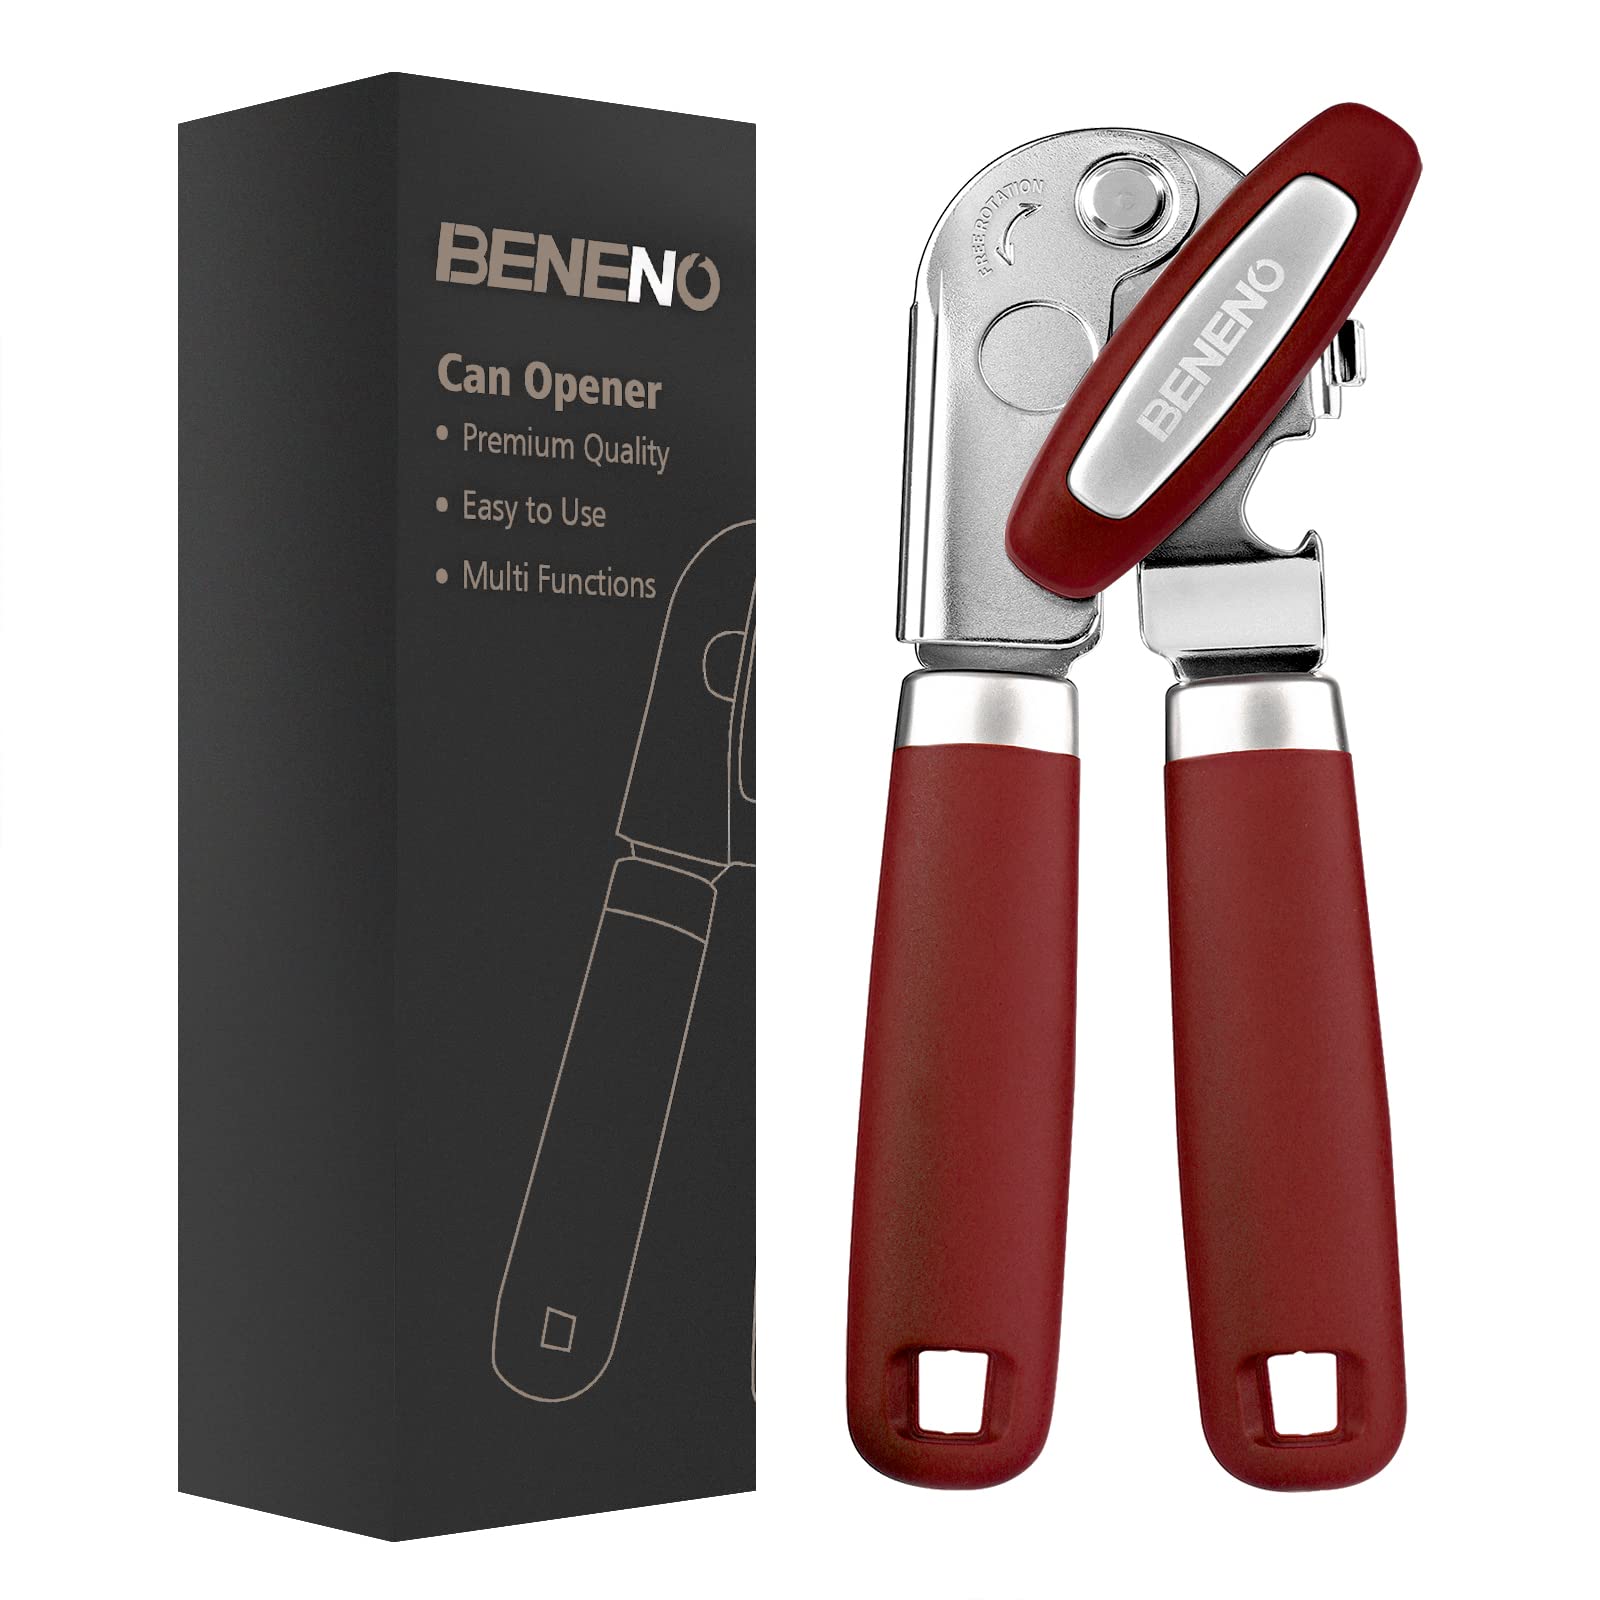 Can Opener Manual, Can Opener with Magnet, Hand Can Opener with Sharp Blade Smooth Edge, Handheld Can Openers with Big Effort-Saving Knob, Can Opener with Multifunctional Bottles Opener, Red